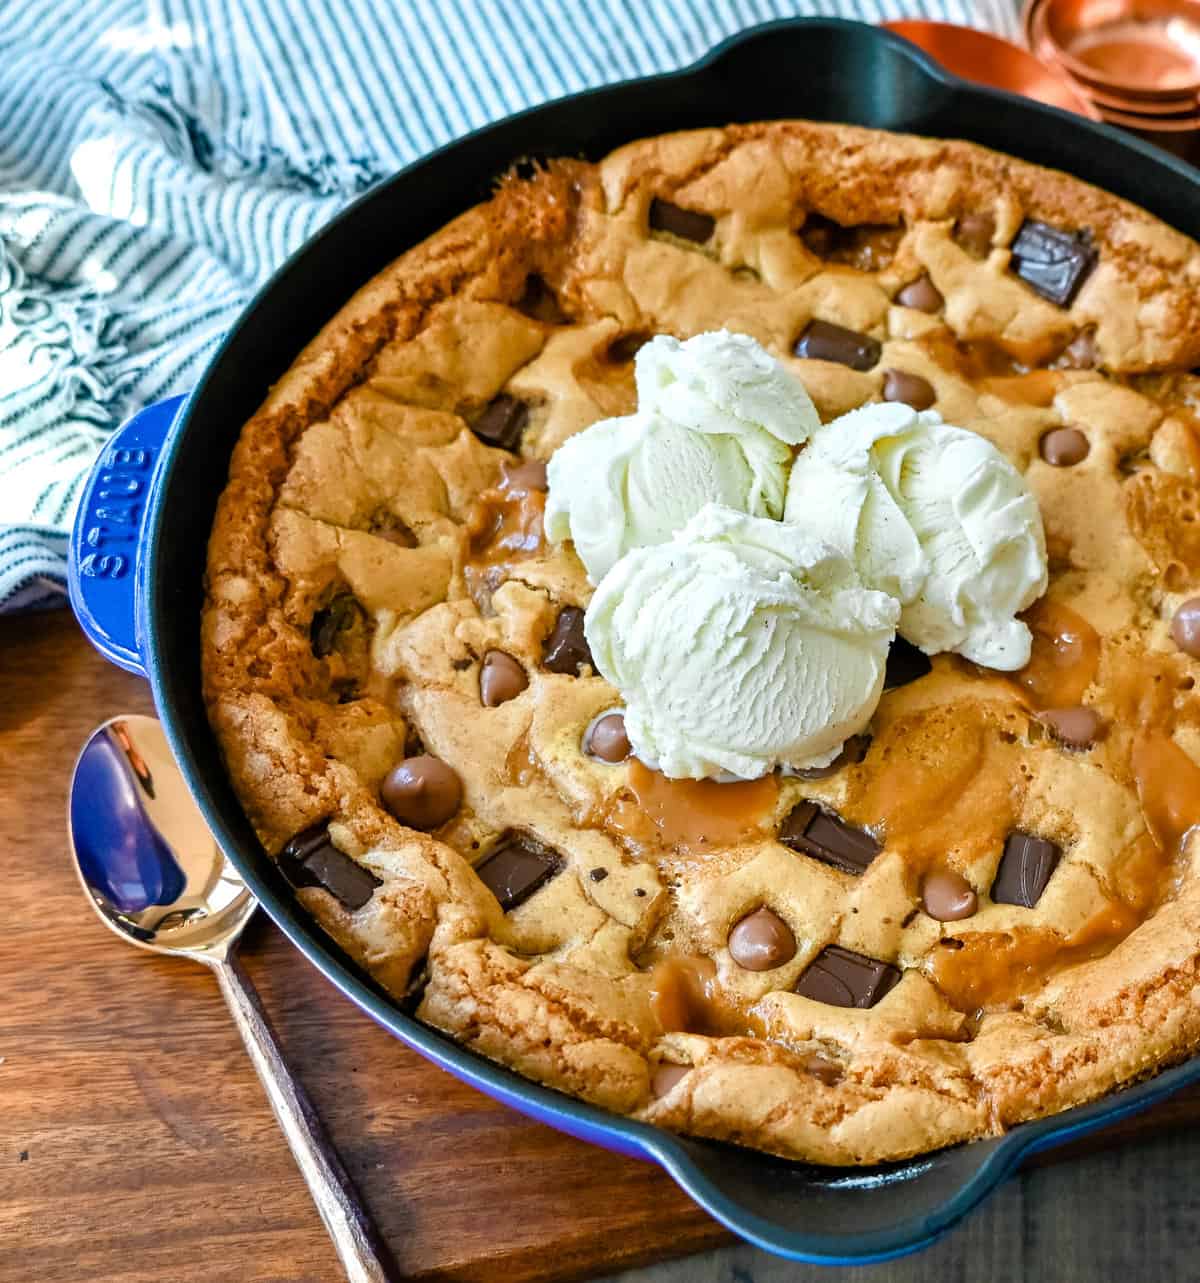 This salted caramel chocolate skillet cookie baked in a cast iron skillet and topped with vanilla ice cream has the perfect combination of sweet and salty caramel, and decadent chocolate in a perfectly buttery cookie.